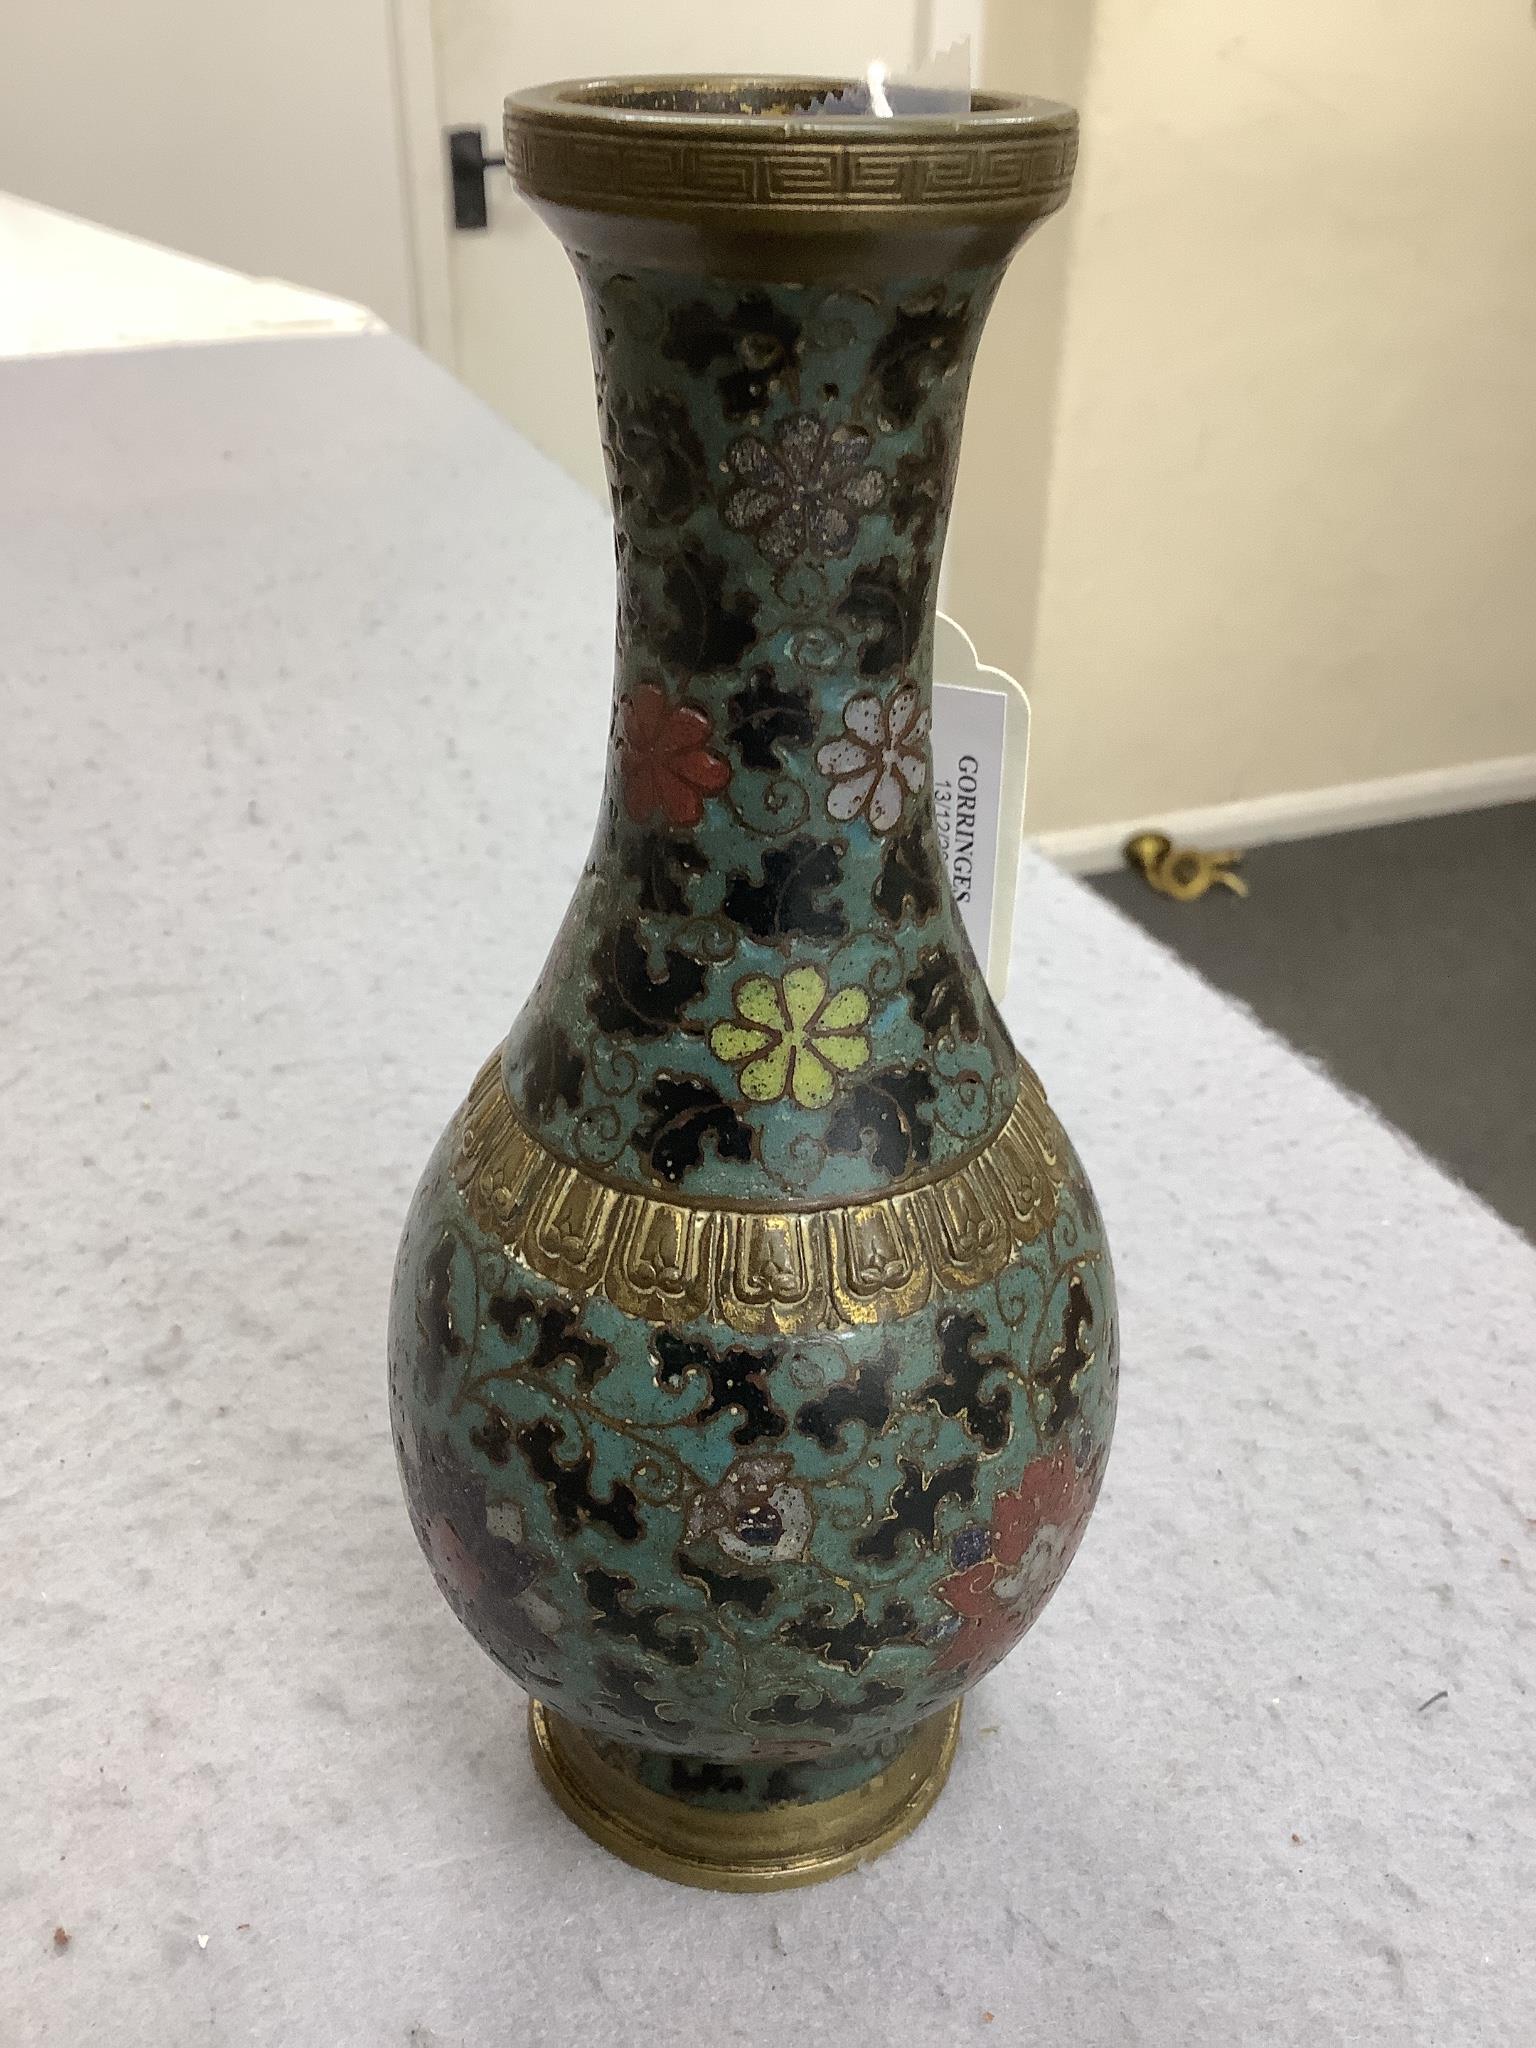 A Chinese cloisonné enamel and gilt bronze baluster vase, 17th/18th century, 19.5cm high, faults